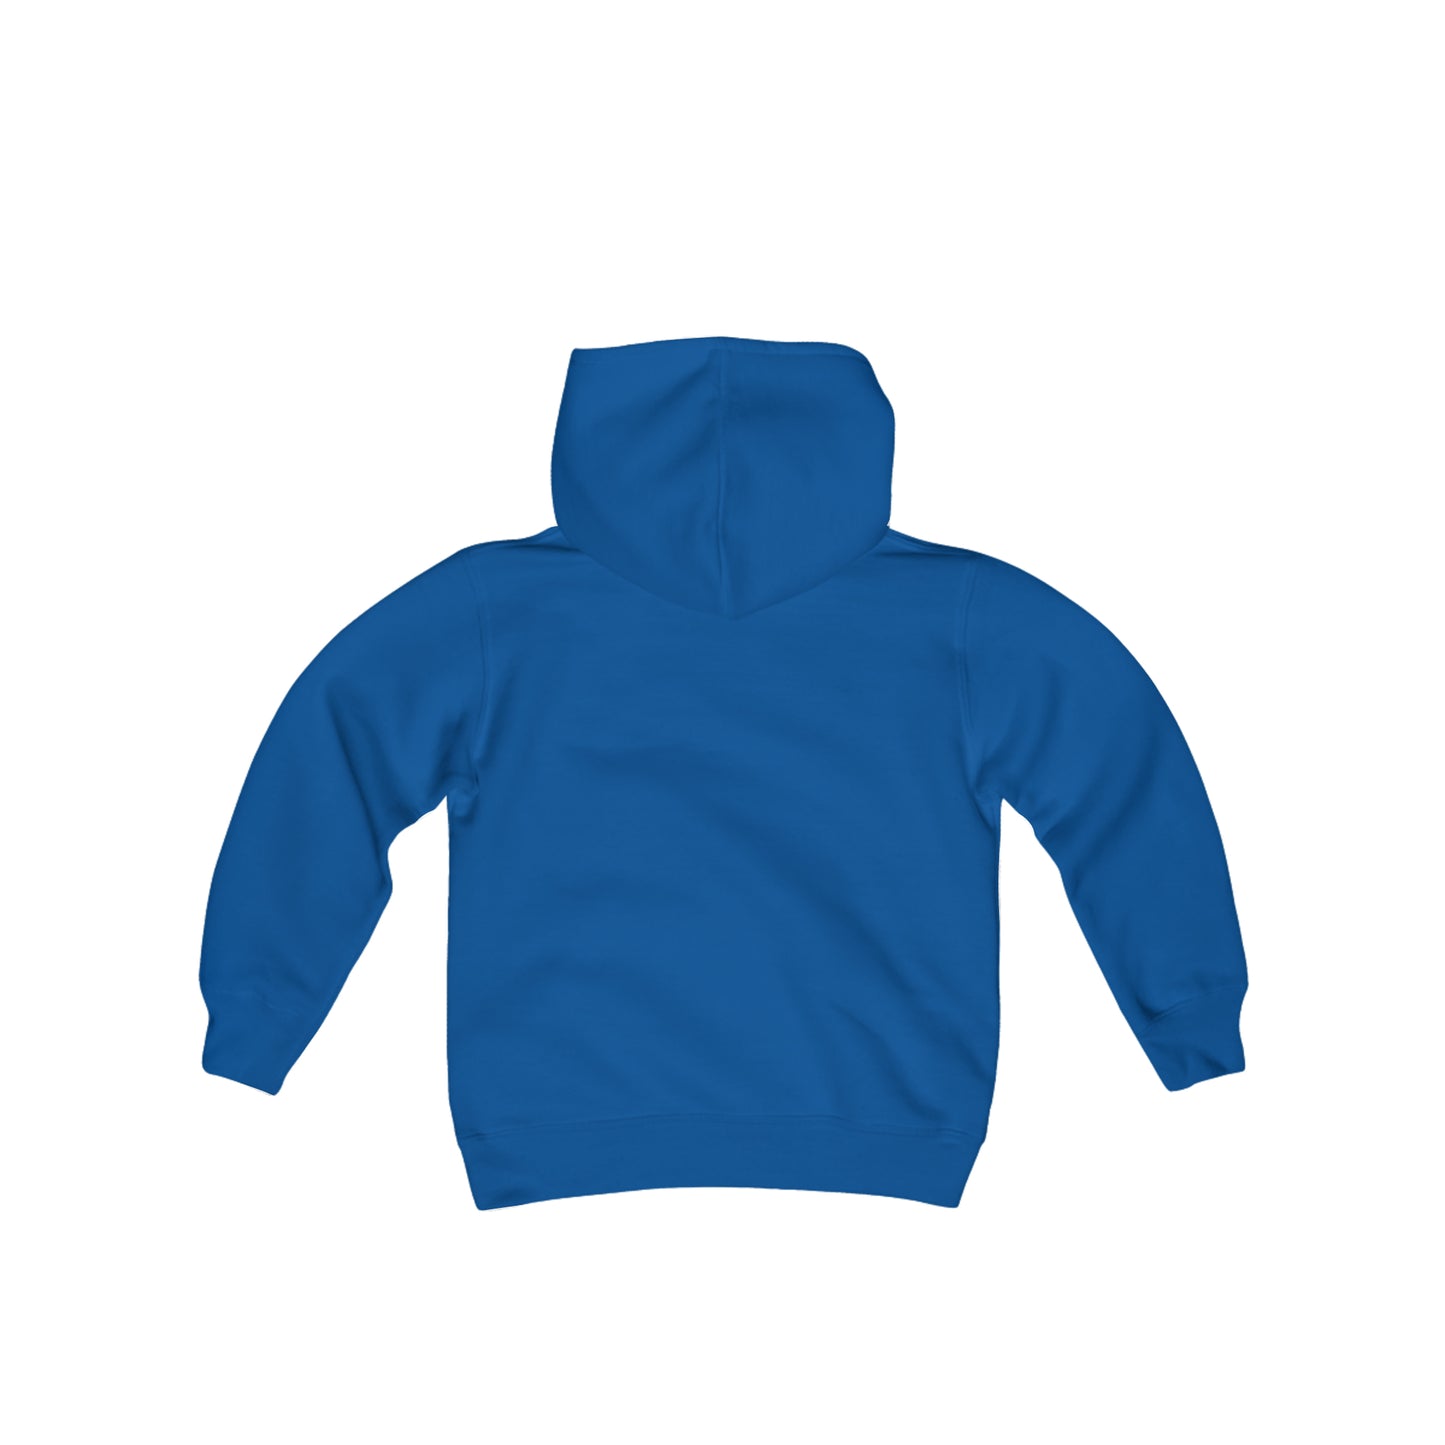 Camp White Branch Youth Hooded Sweatshirt